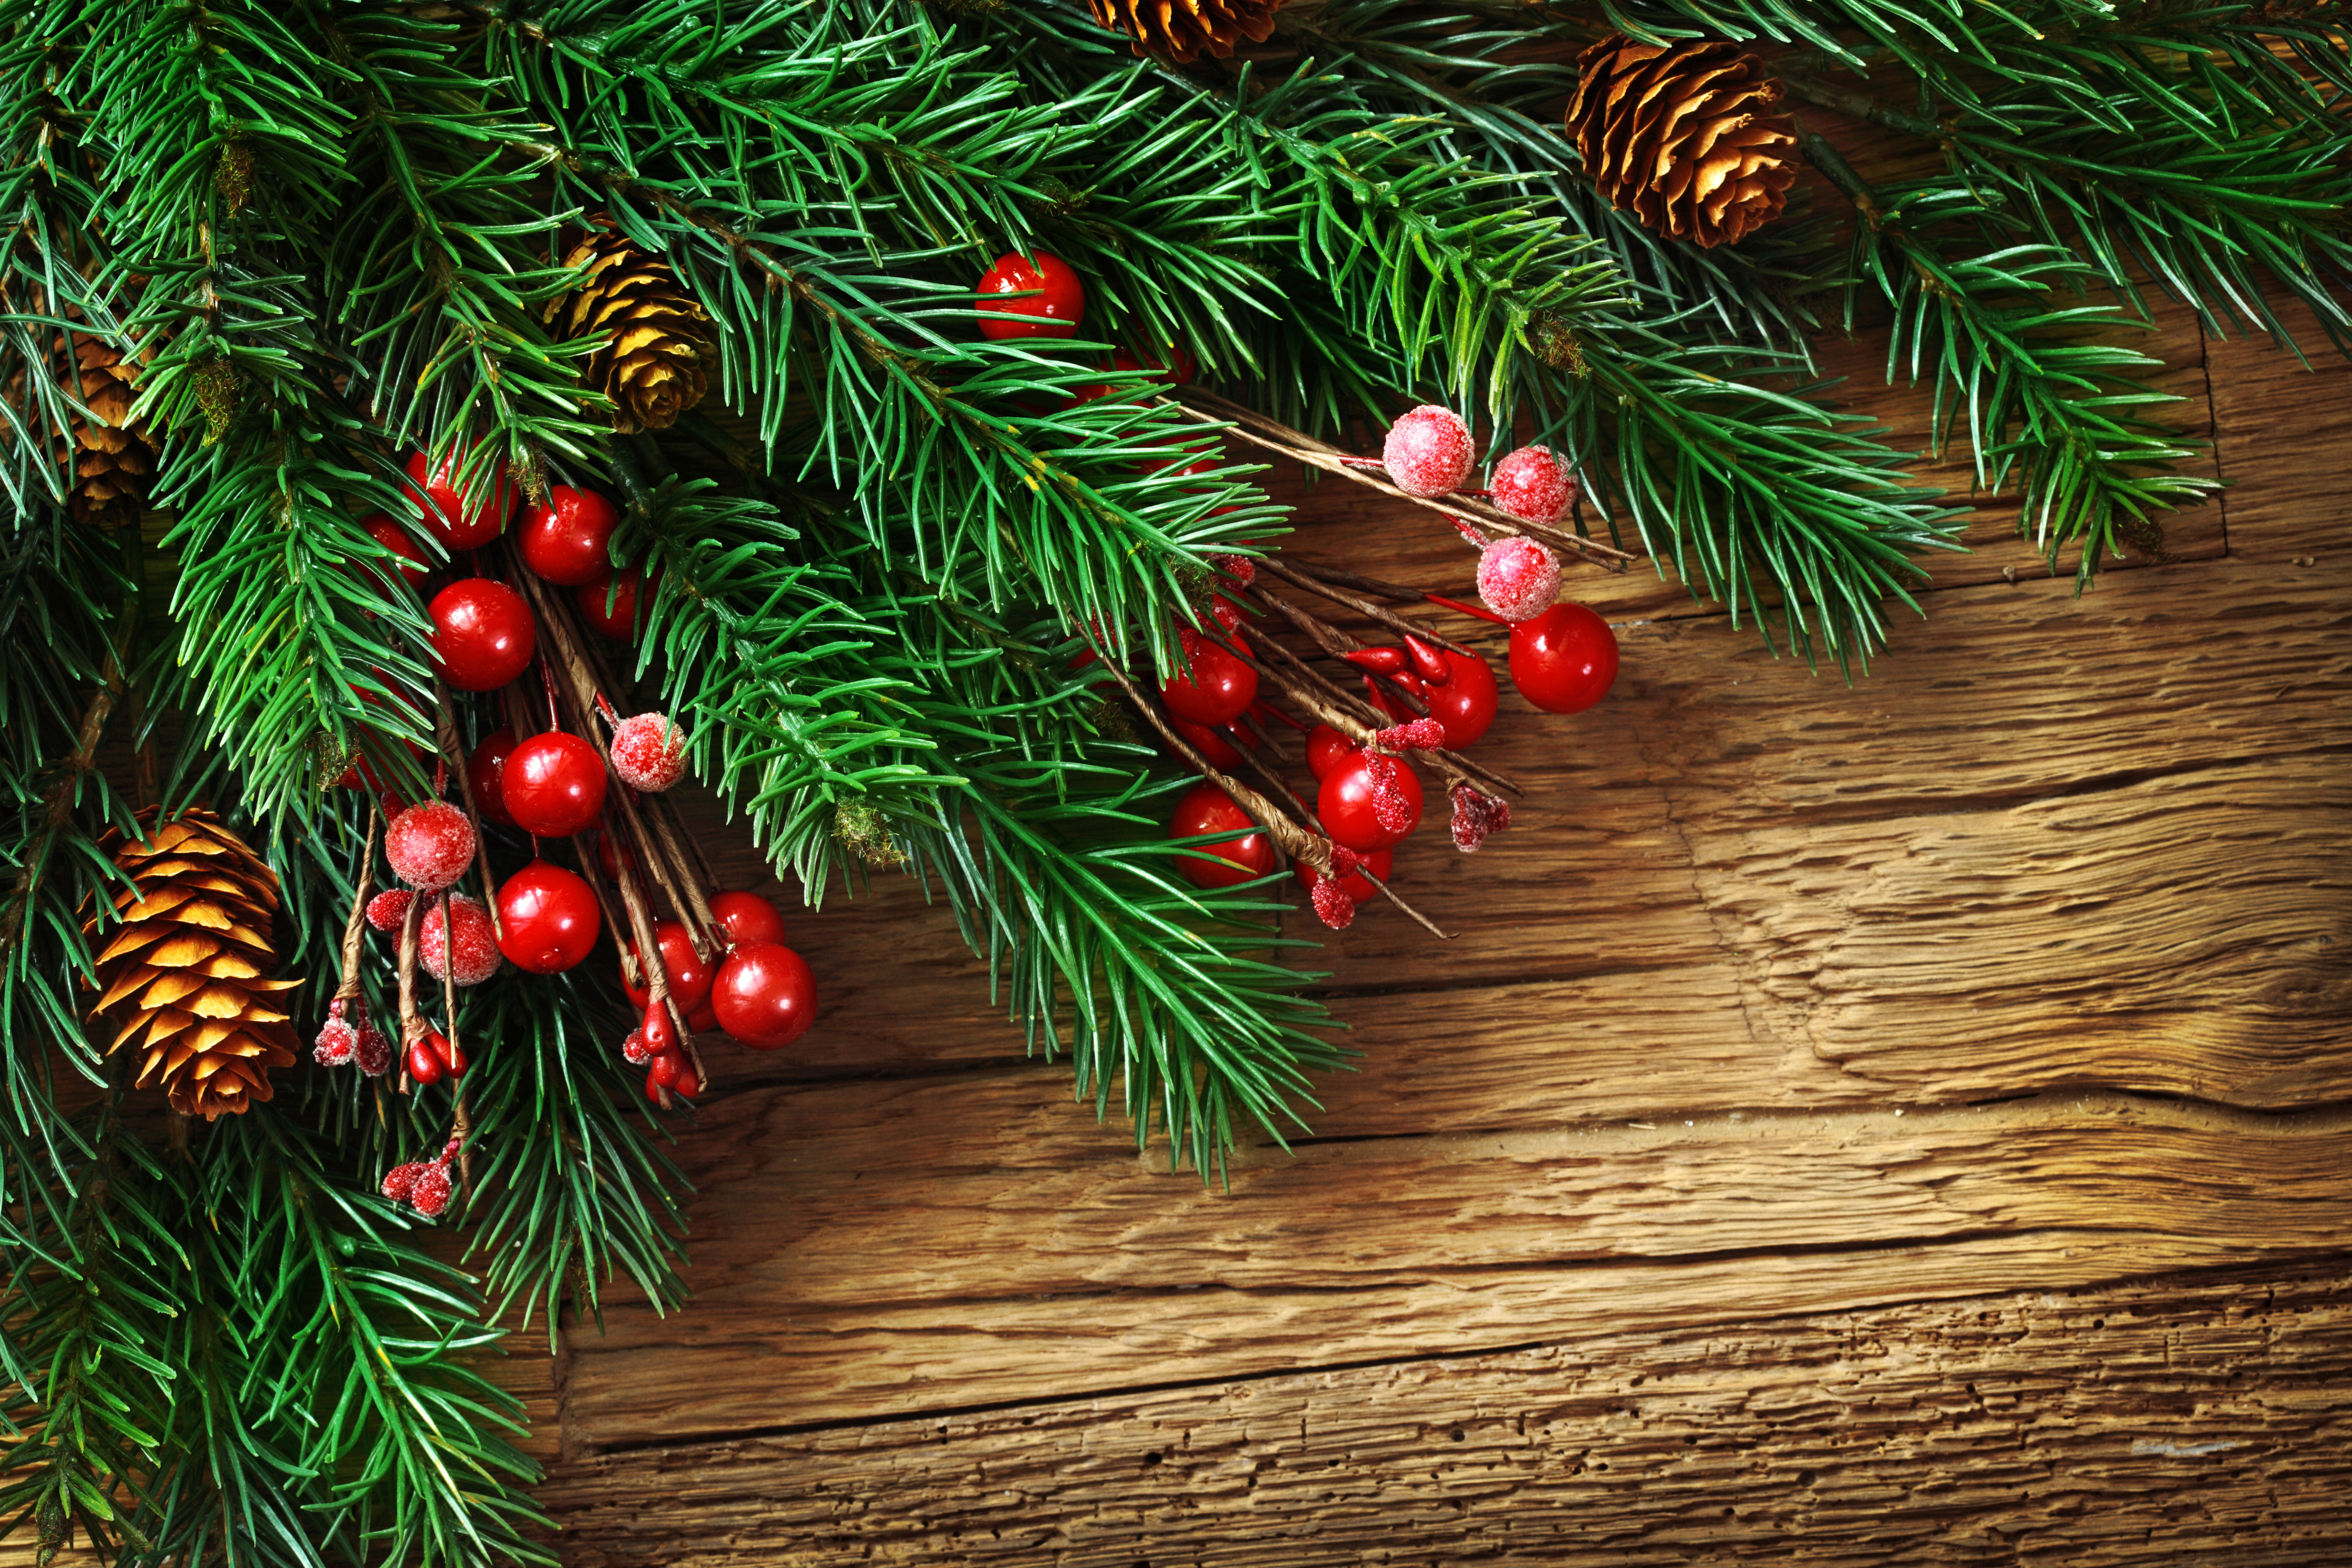 Wooden Christmas Background with Pine Branches | Gallery ...